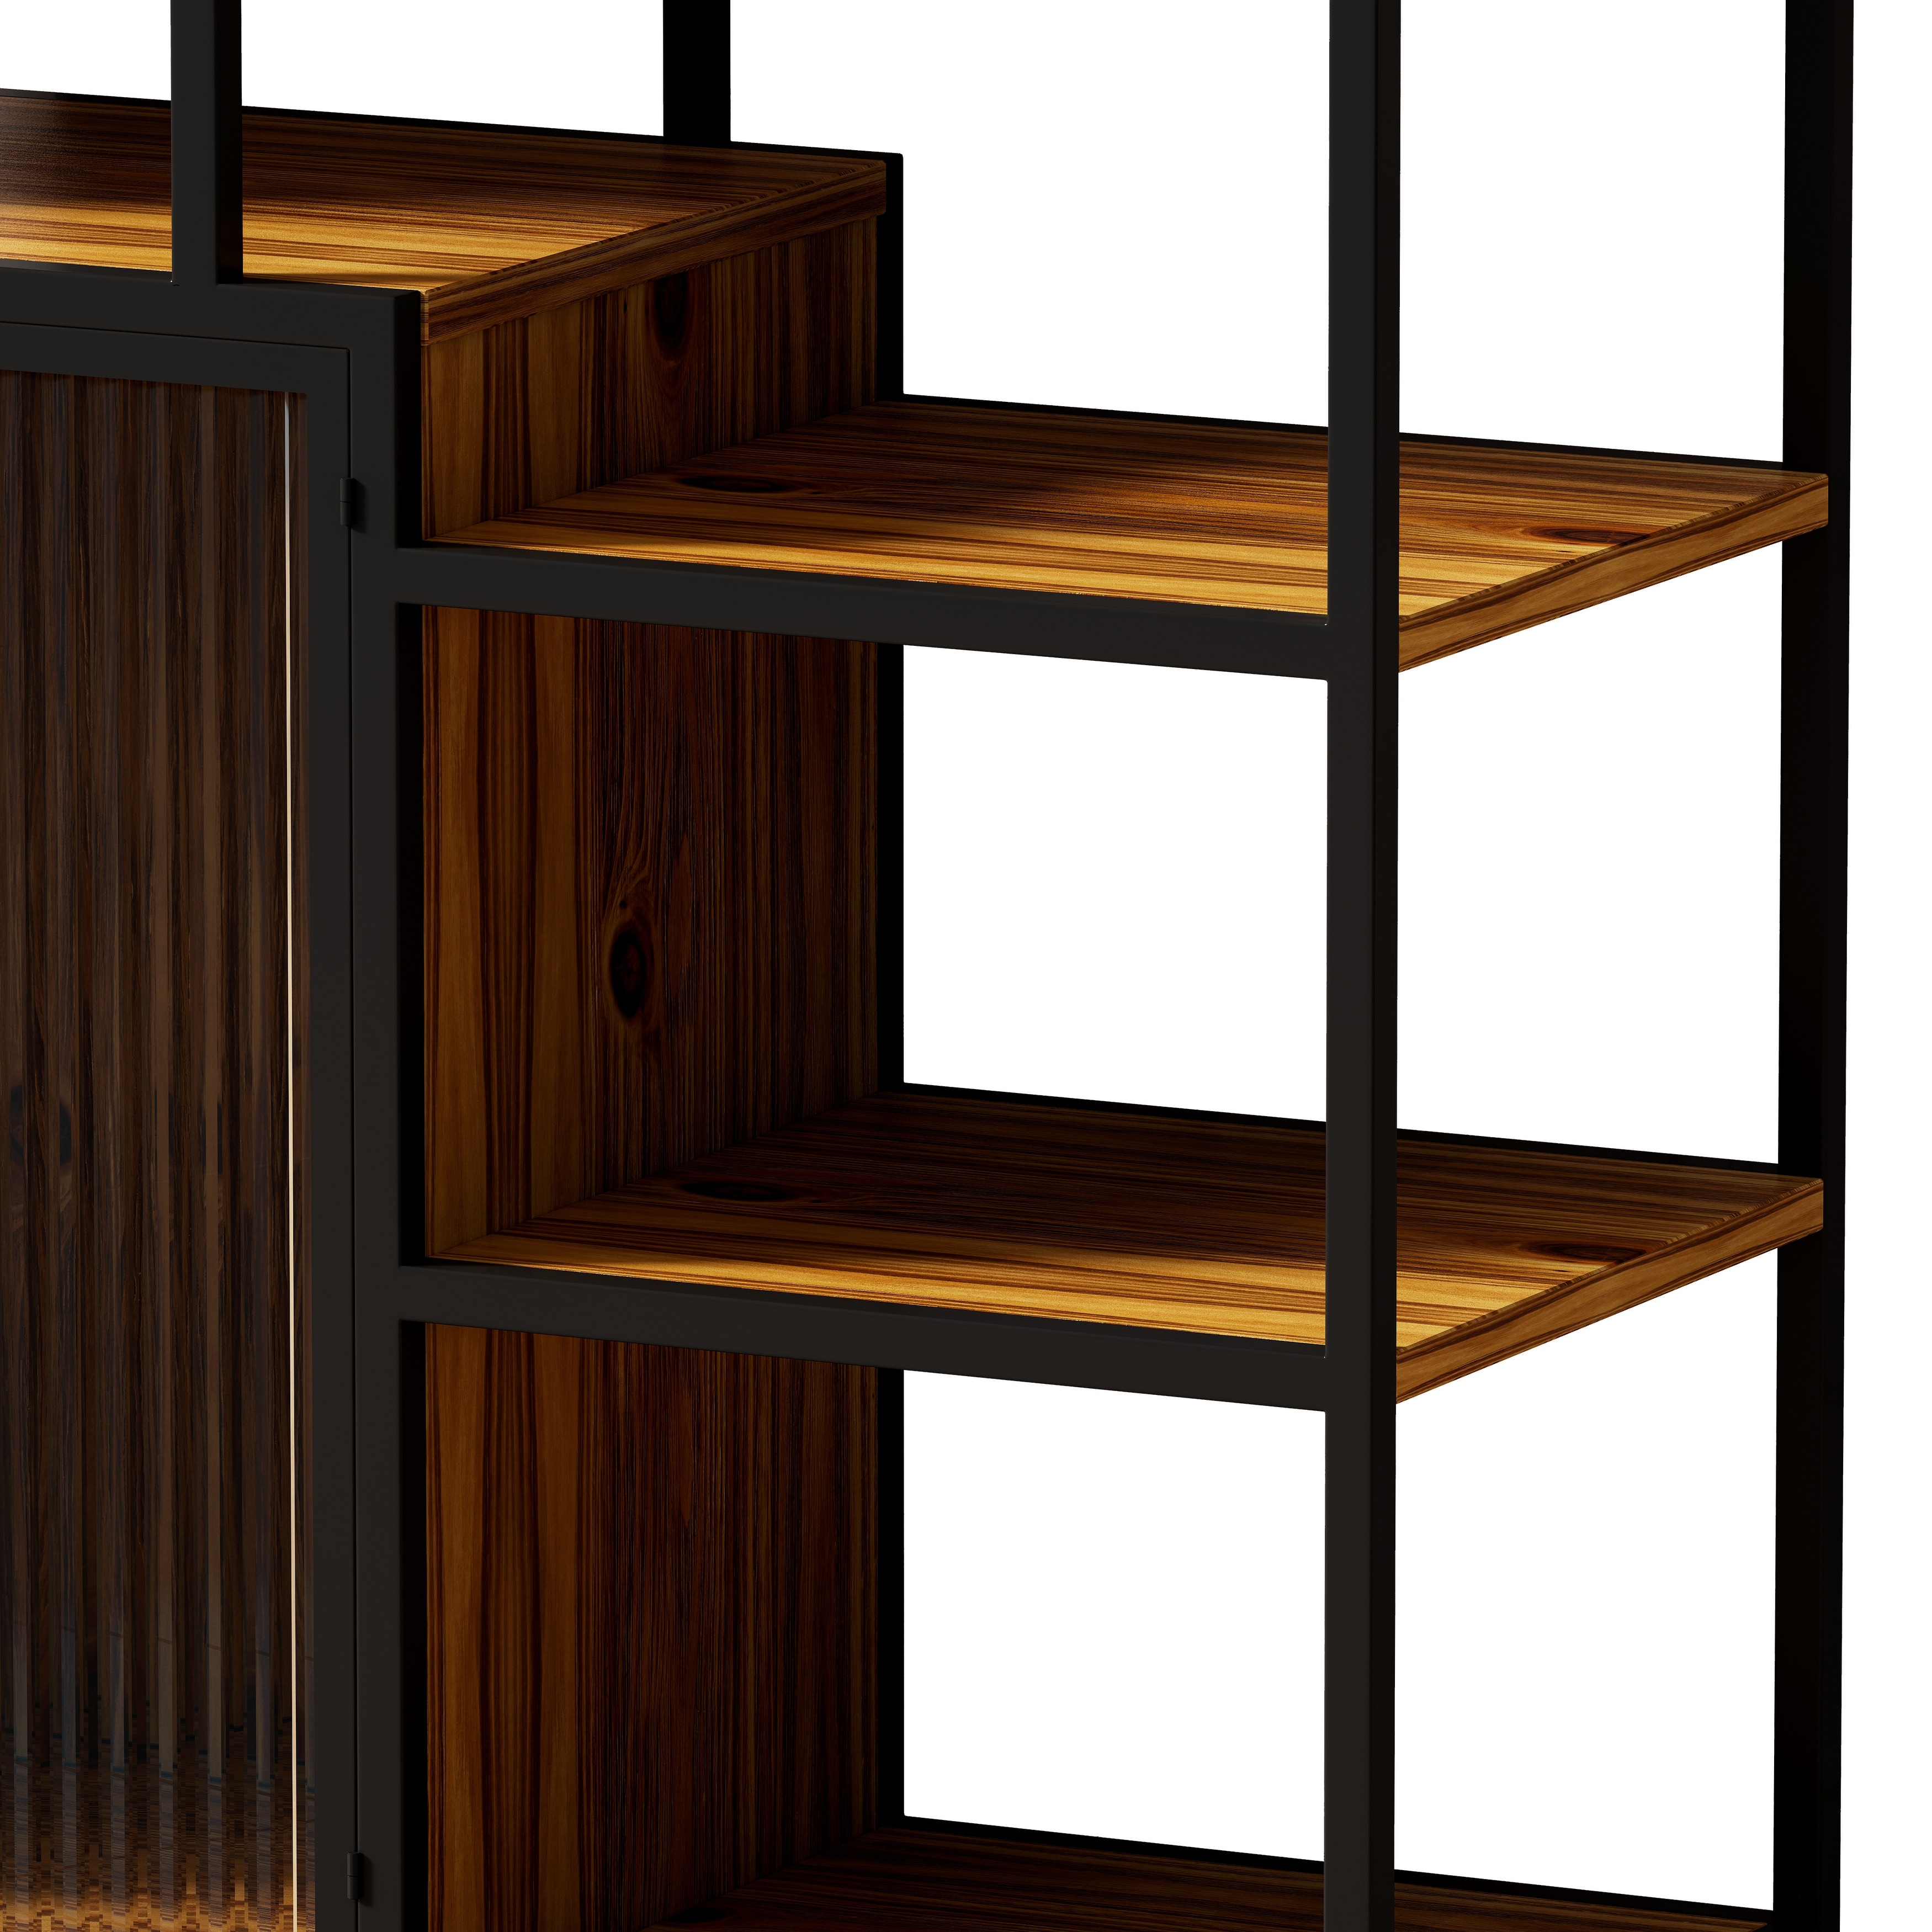 Multipurpose Bookshelf Storage Rack, with Enclosed Storage Cabinet,for Living Room,Home Office,Kitchen